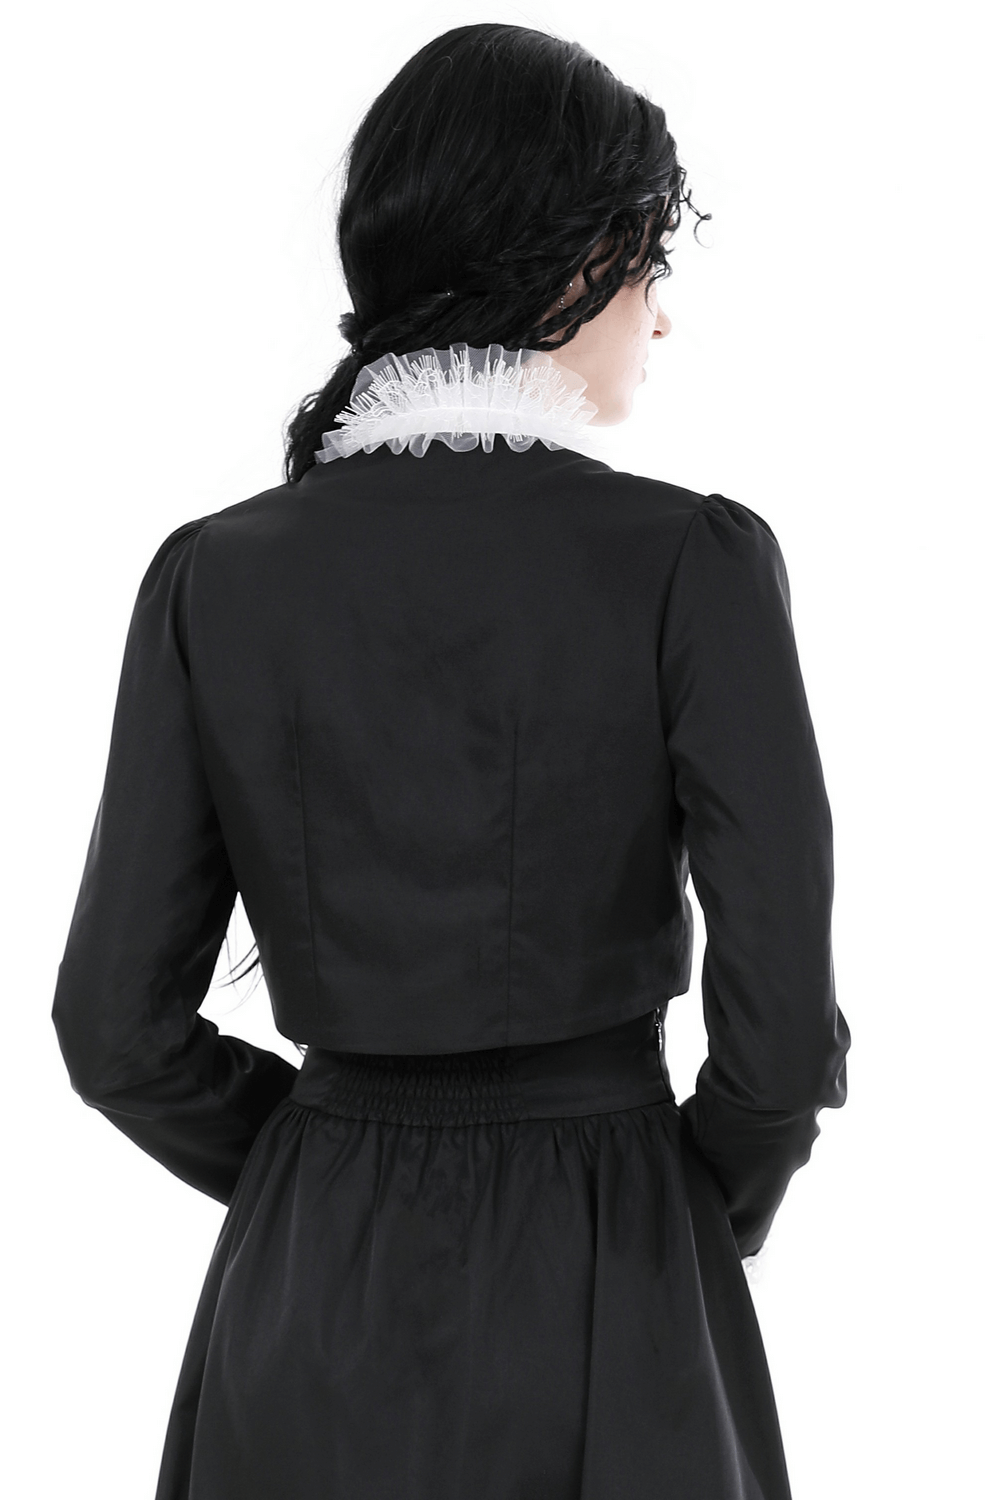 Gothic Cropped Lace Short Jacket with White Ruffle Collar